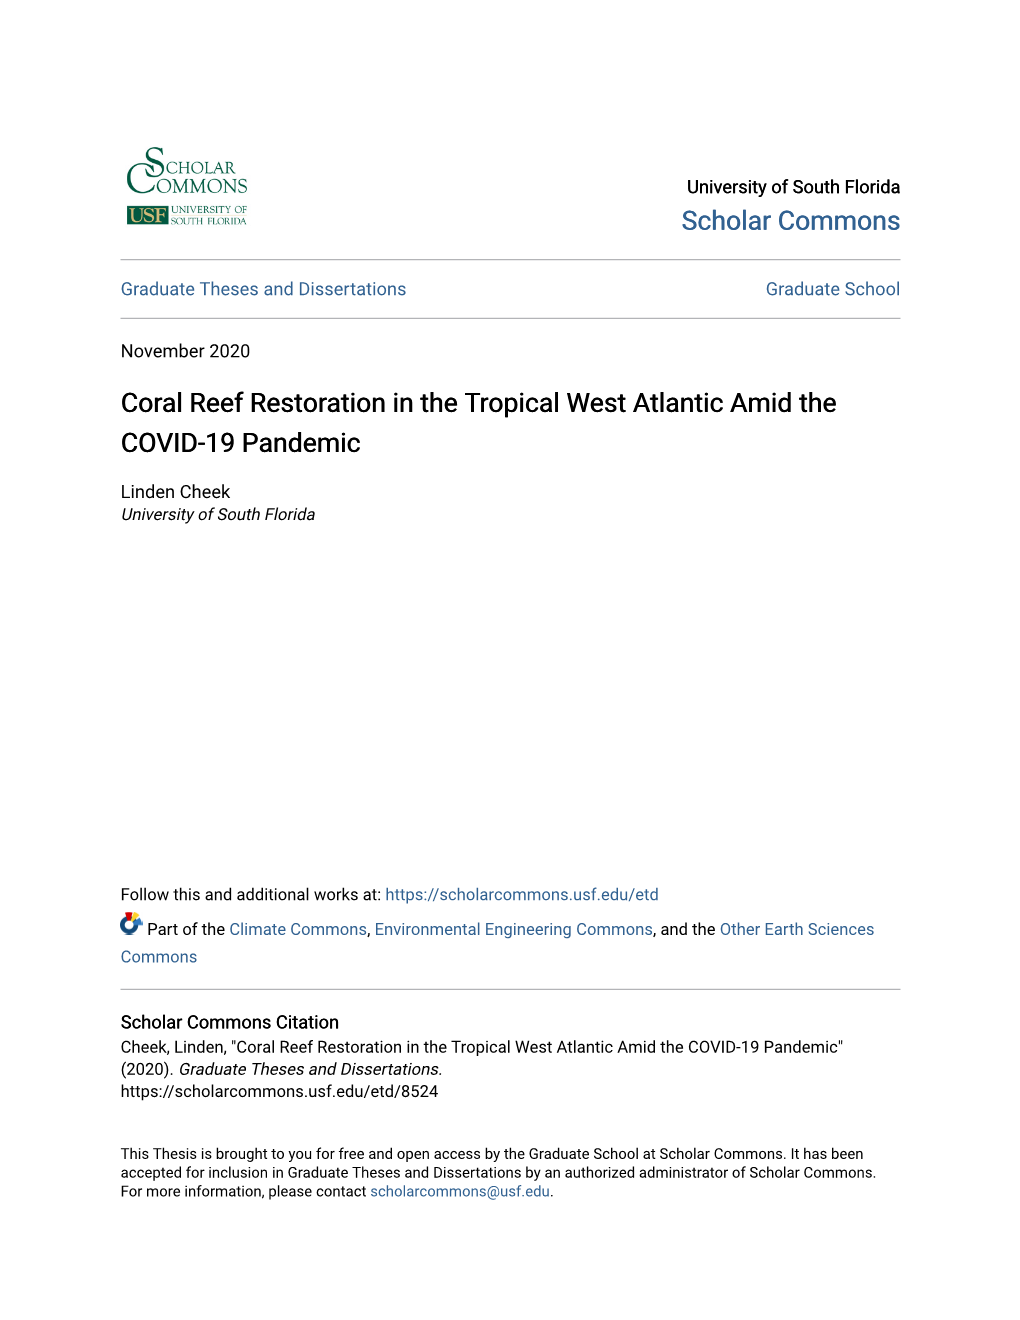 Coral Reef Restoration in the Tropical West Atlantic Amid the COVID-19 Pandemic